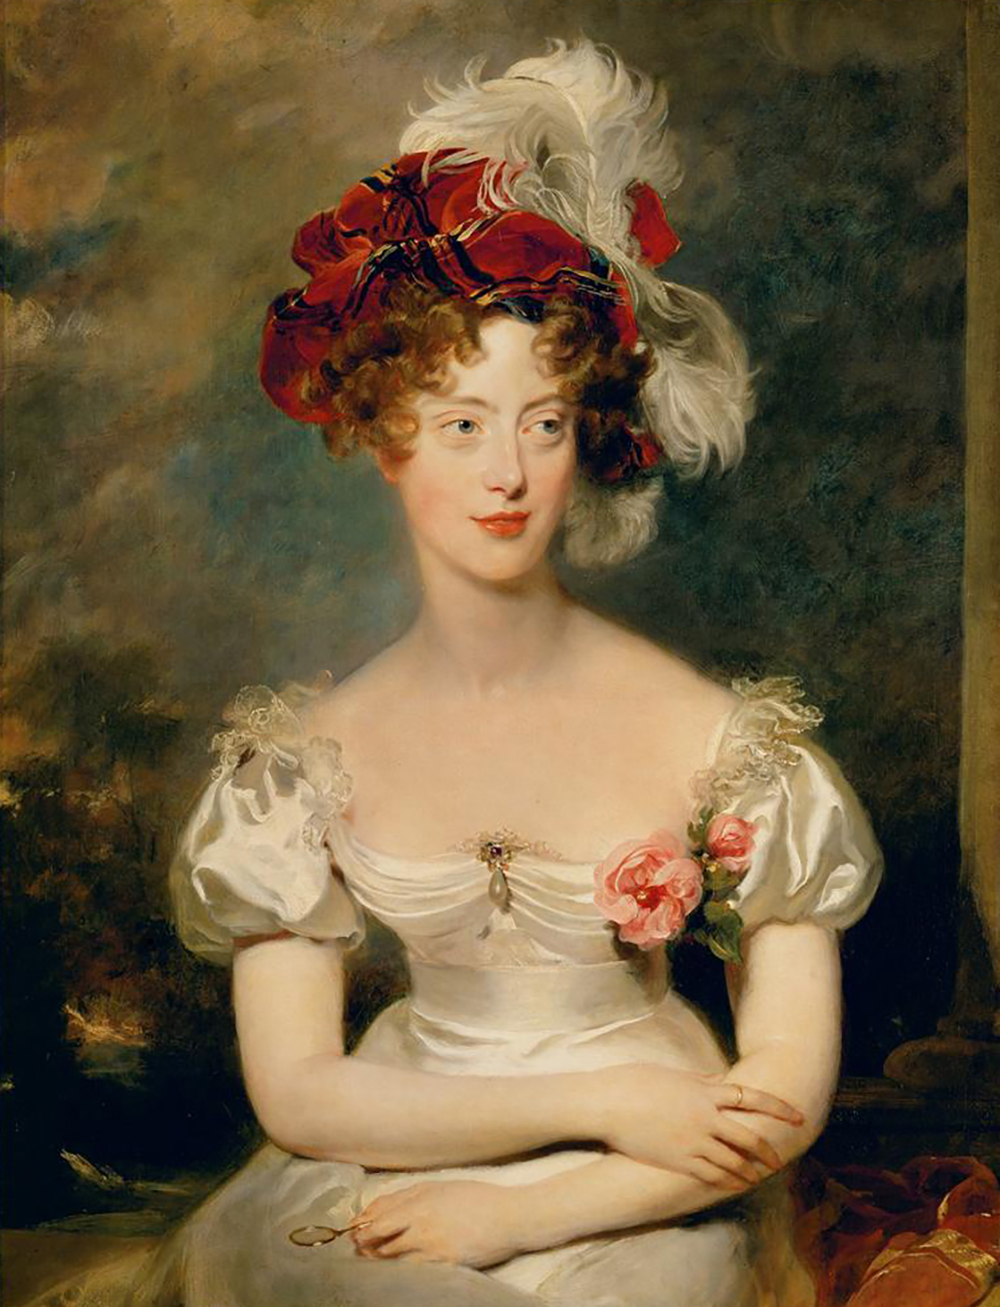 La Duchesse de Berry, by Thomas Lawrence, 1825. Wikimedia Commons, Palace of Versailles.